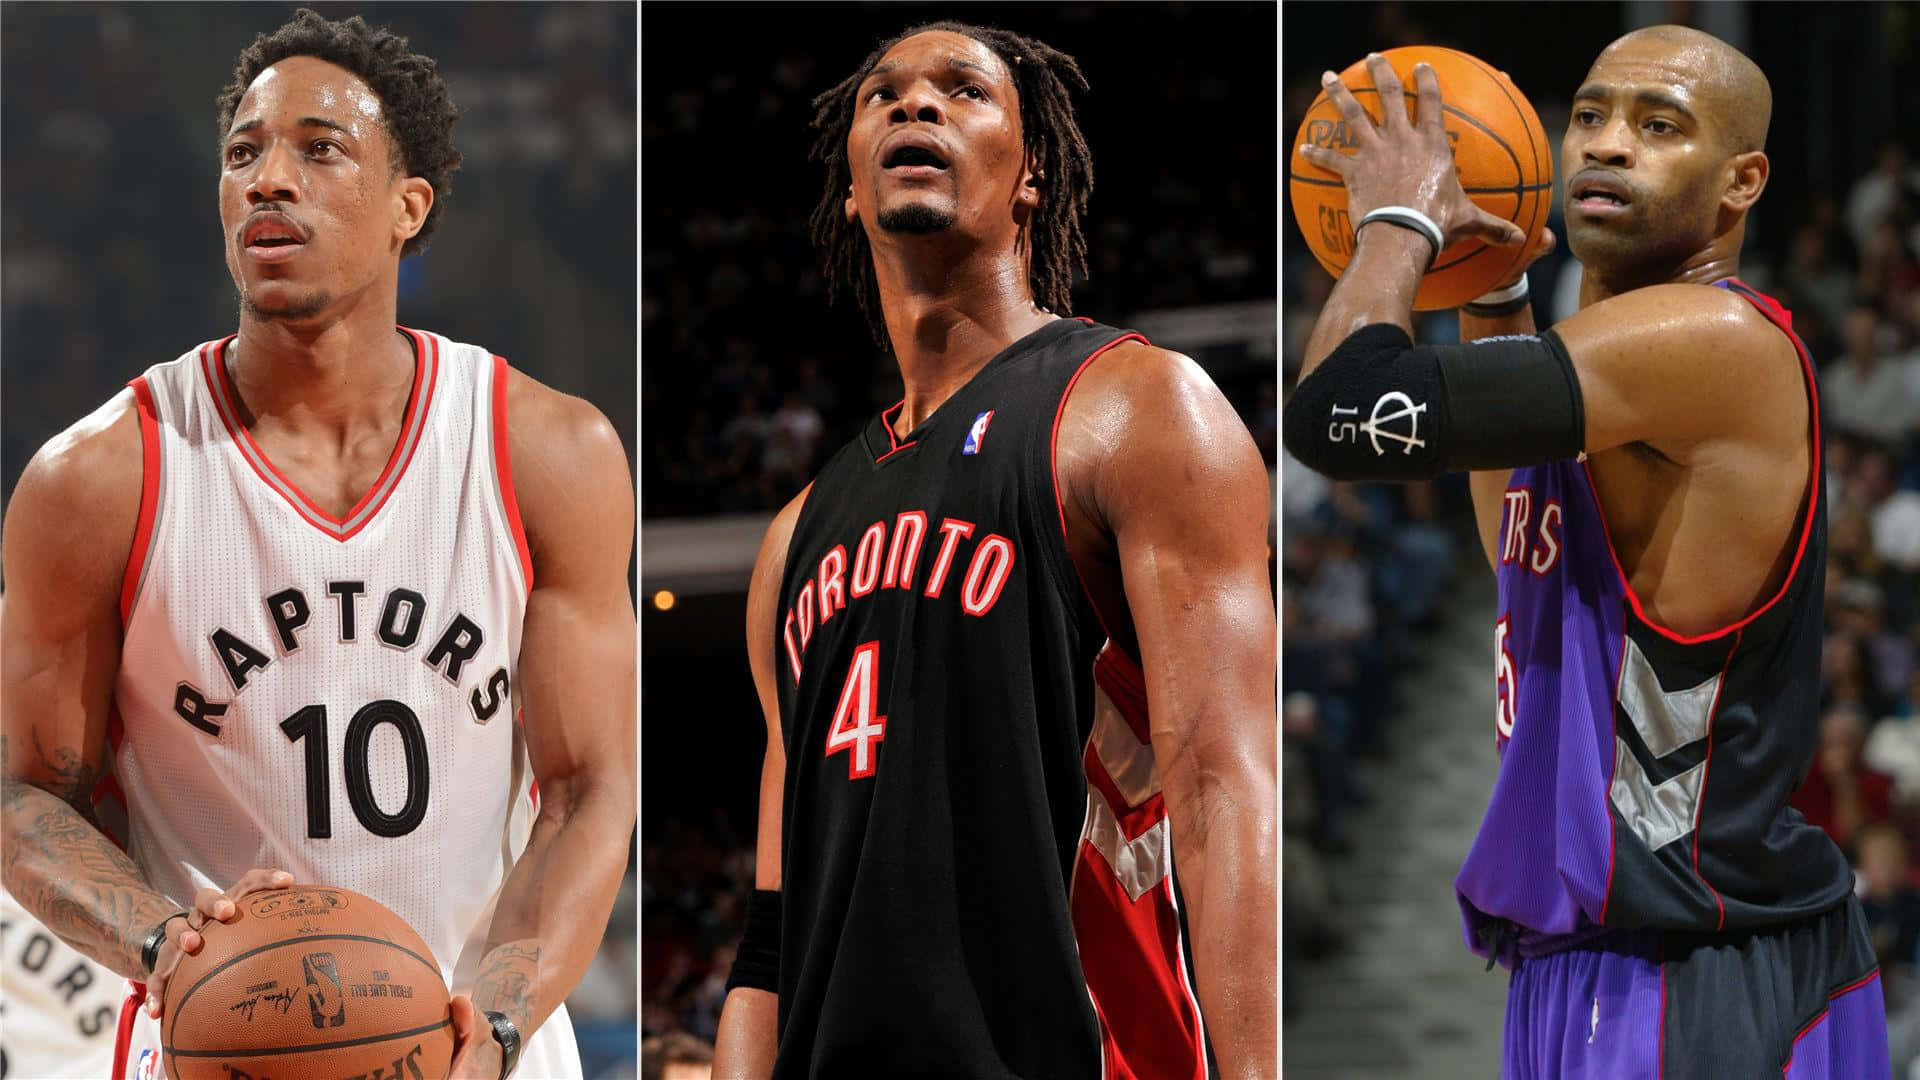 Chris Bosh With DeMar DeRozan And Vince Carter Collage Wallpaper